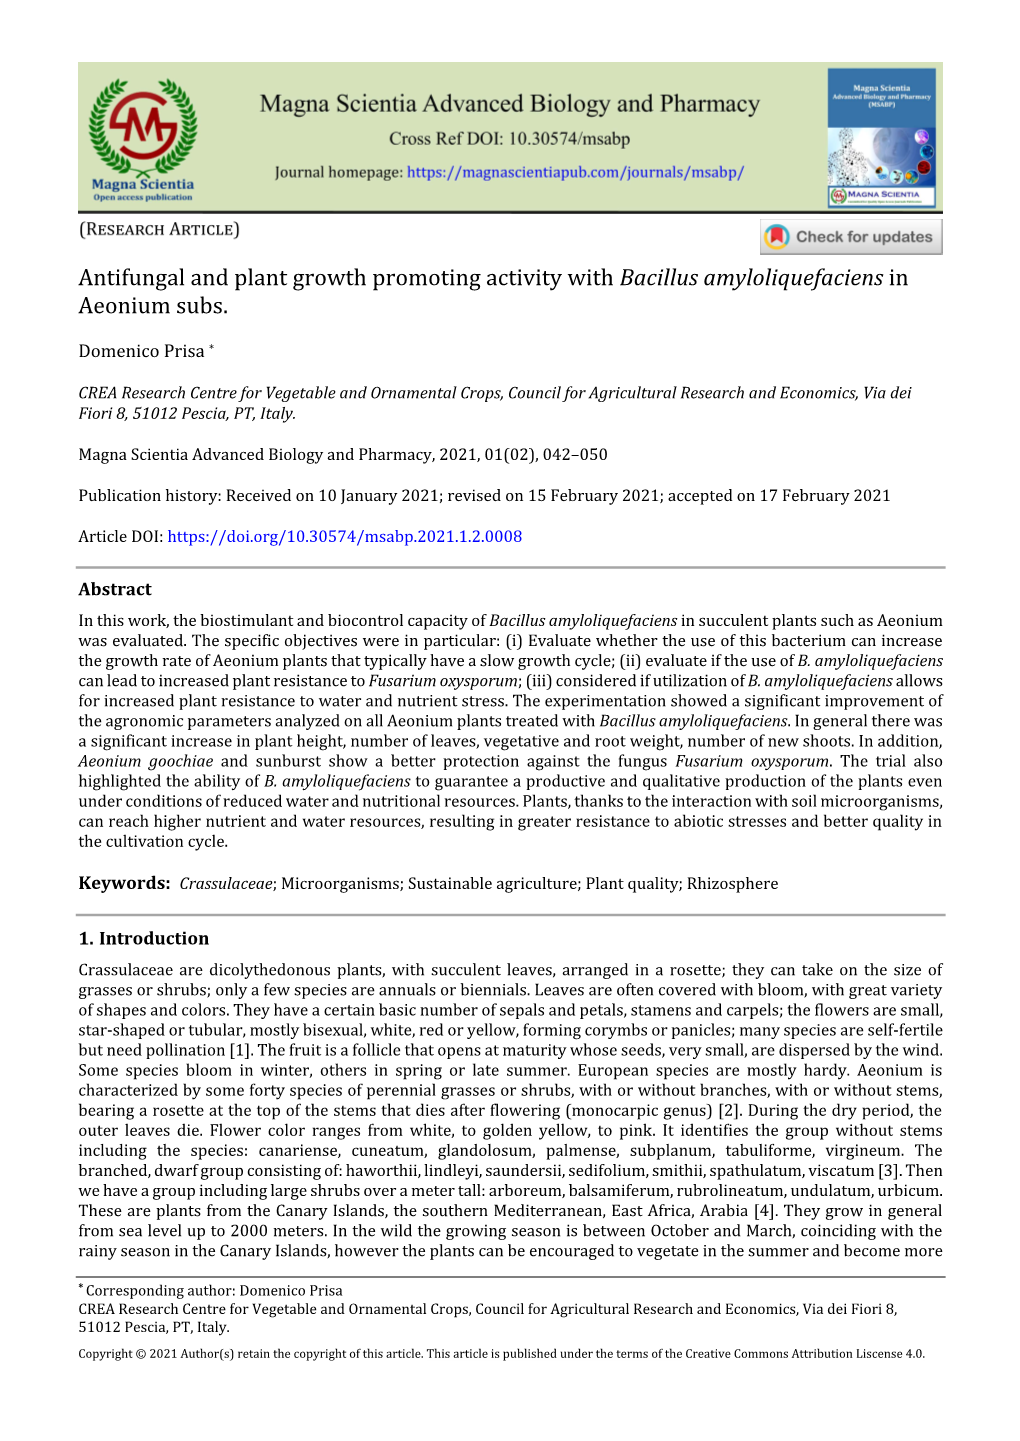 Antifungal and Plant Growth Promoting Activity with Bacillus Amyloliquefaciens in Aeonium Subs